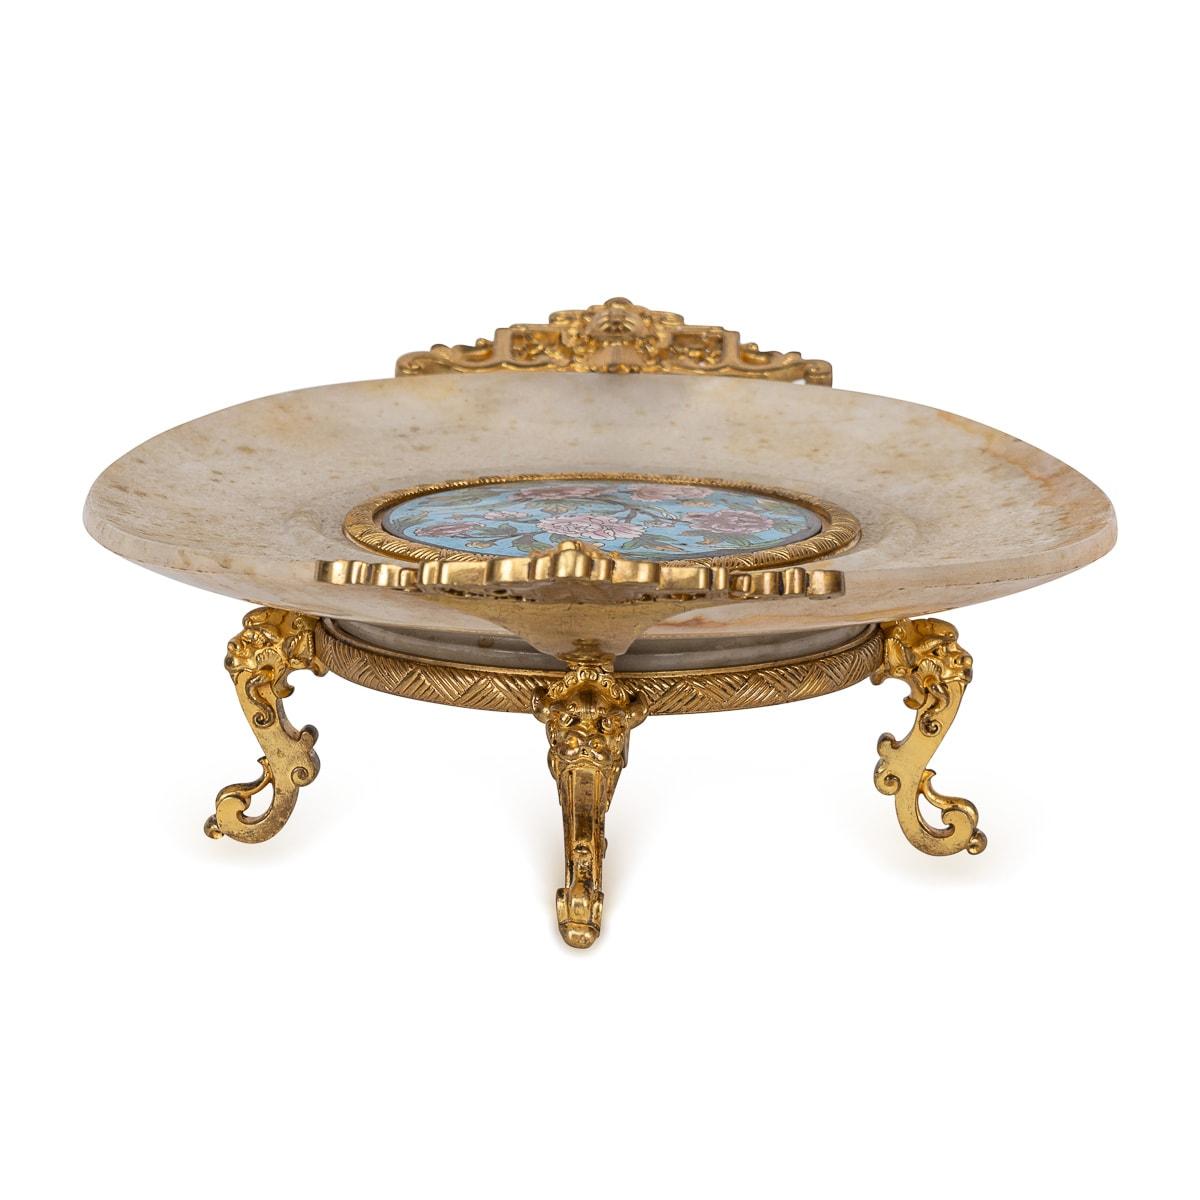 19th Century French Ormolu Mounted Onyx Marble & Enamel Centrepiece c.1880 For Sale 1